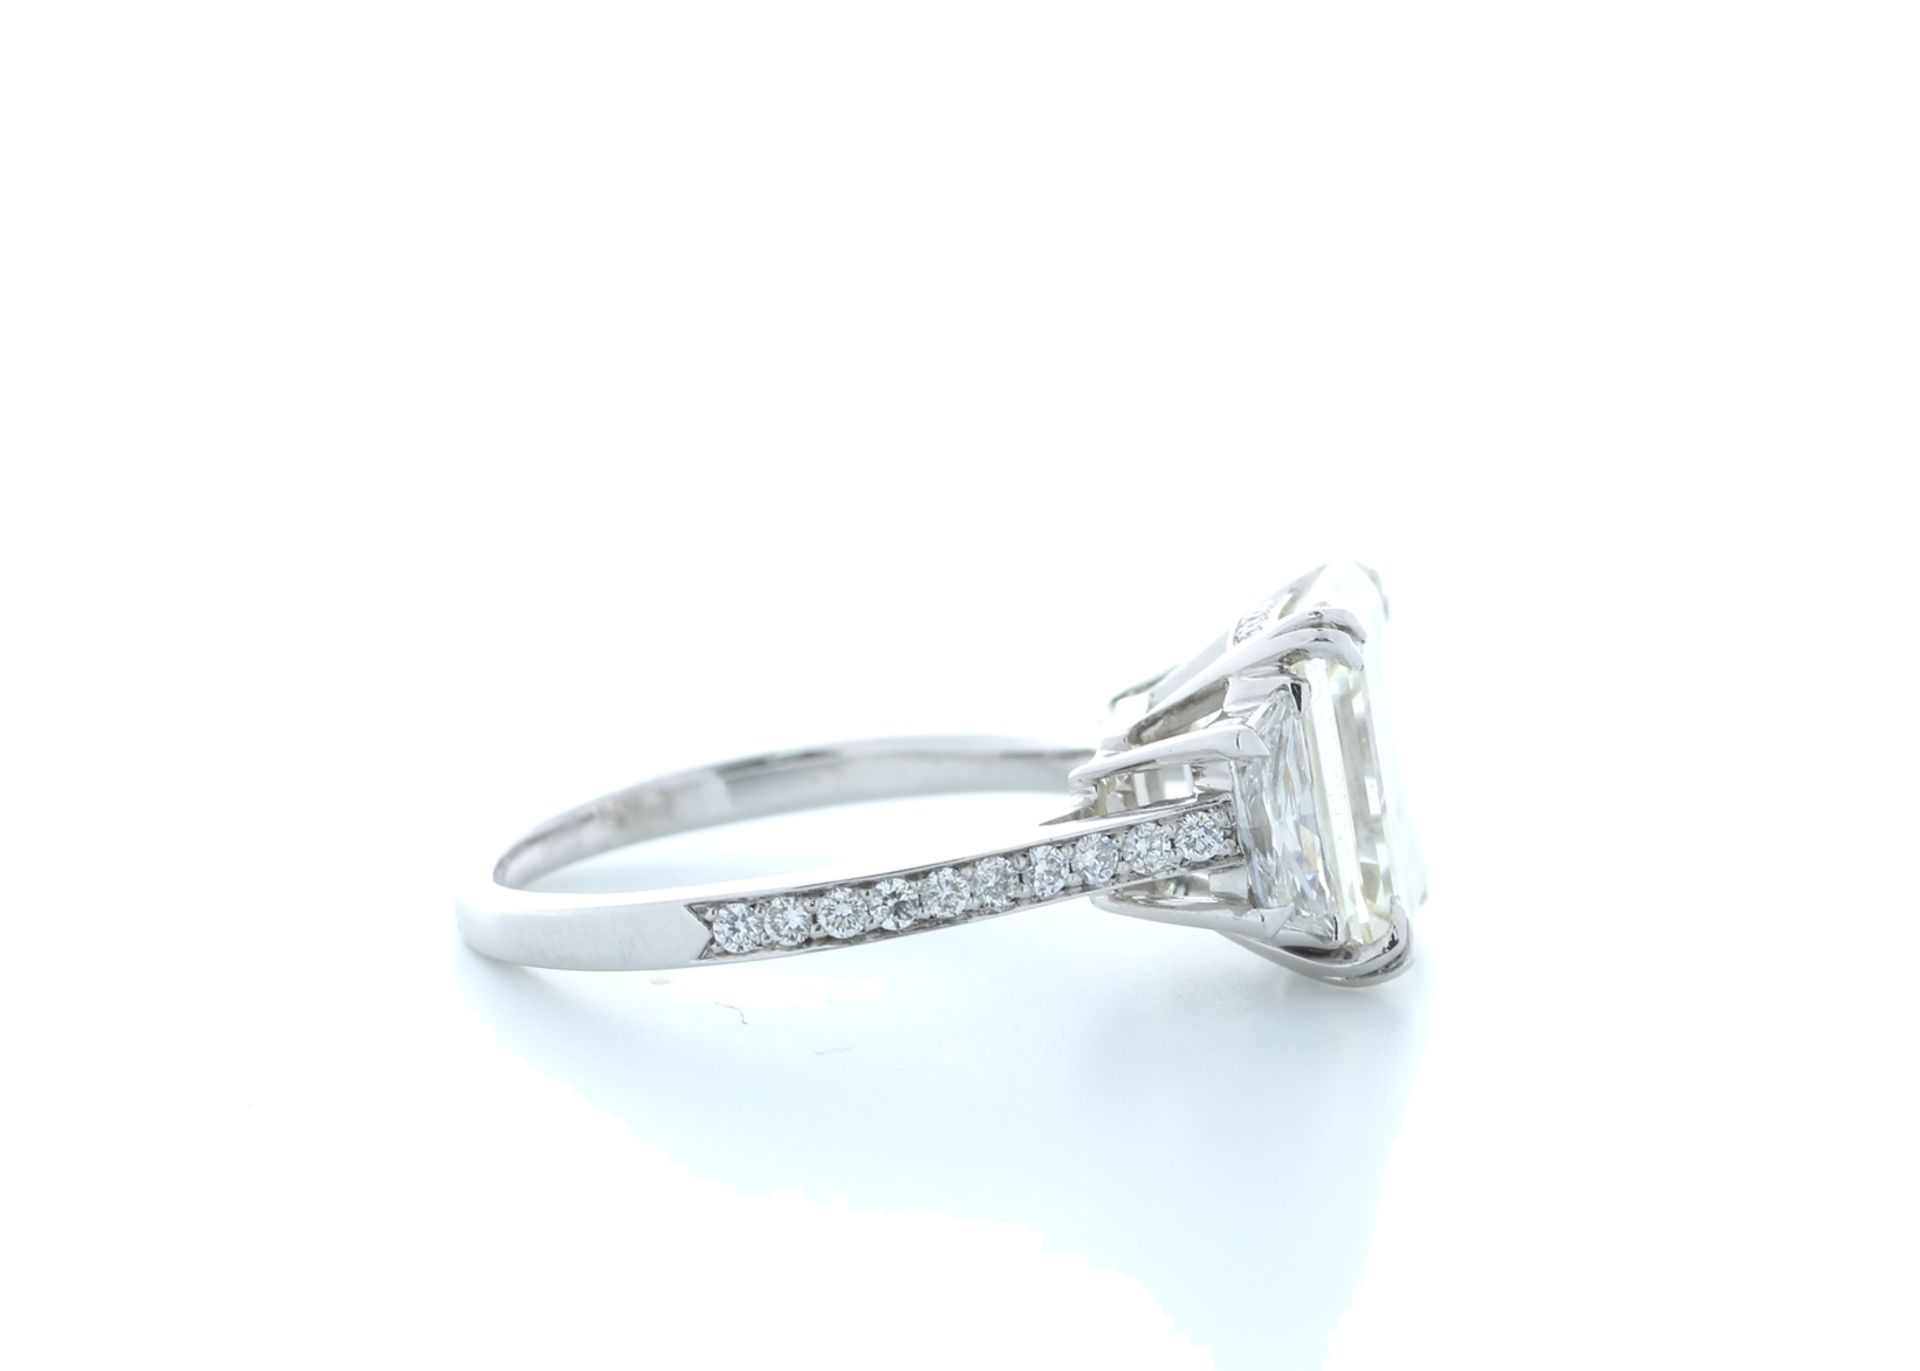 18ct White Gold Emerald Cut Diamond Ring 5.31 (4.56) Carats - Valued by IDI £190,000.00 - 18ct White - Image 4 of 5